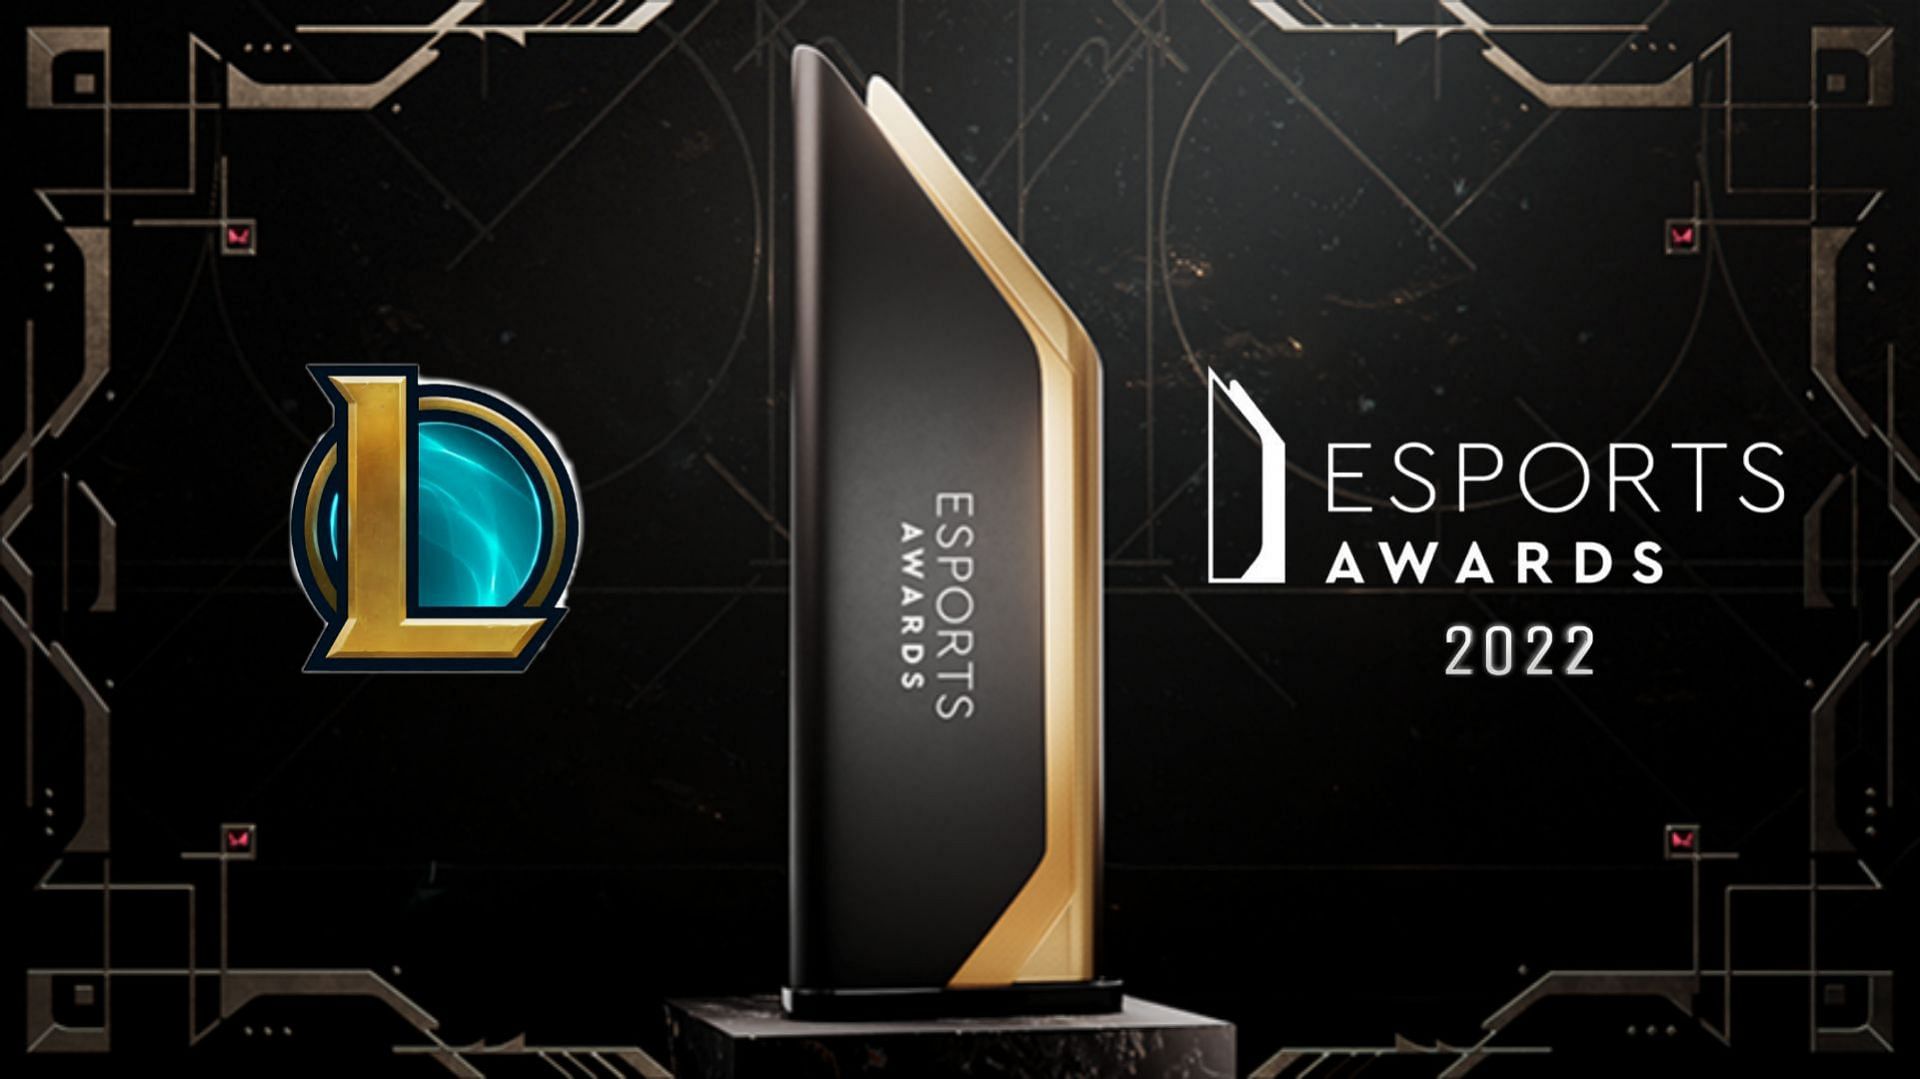 League of Legends nominated for Esports Game of the Year (Image via Esports Awards)